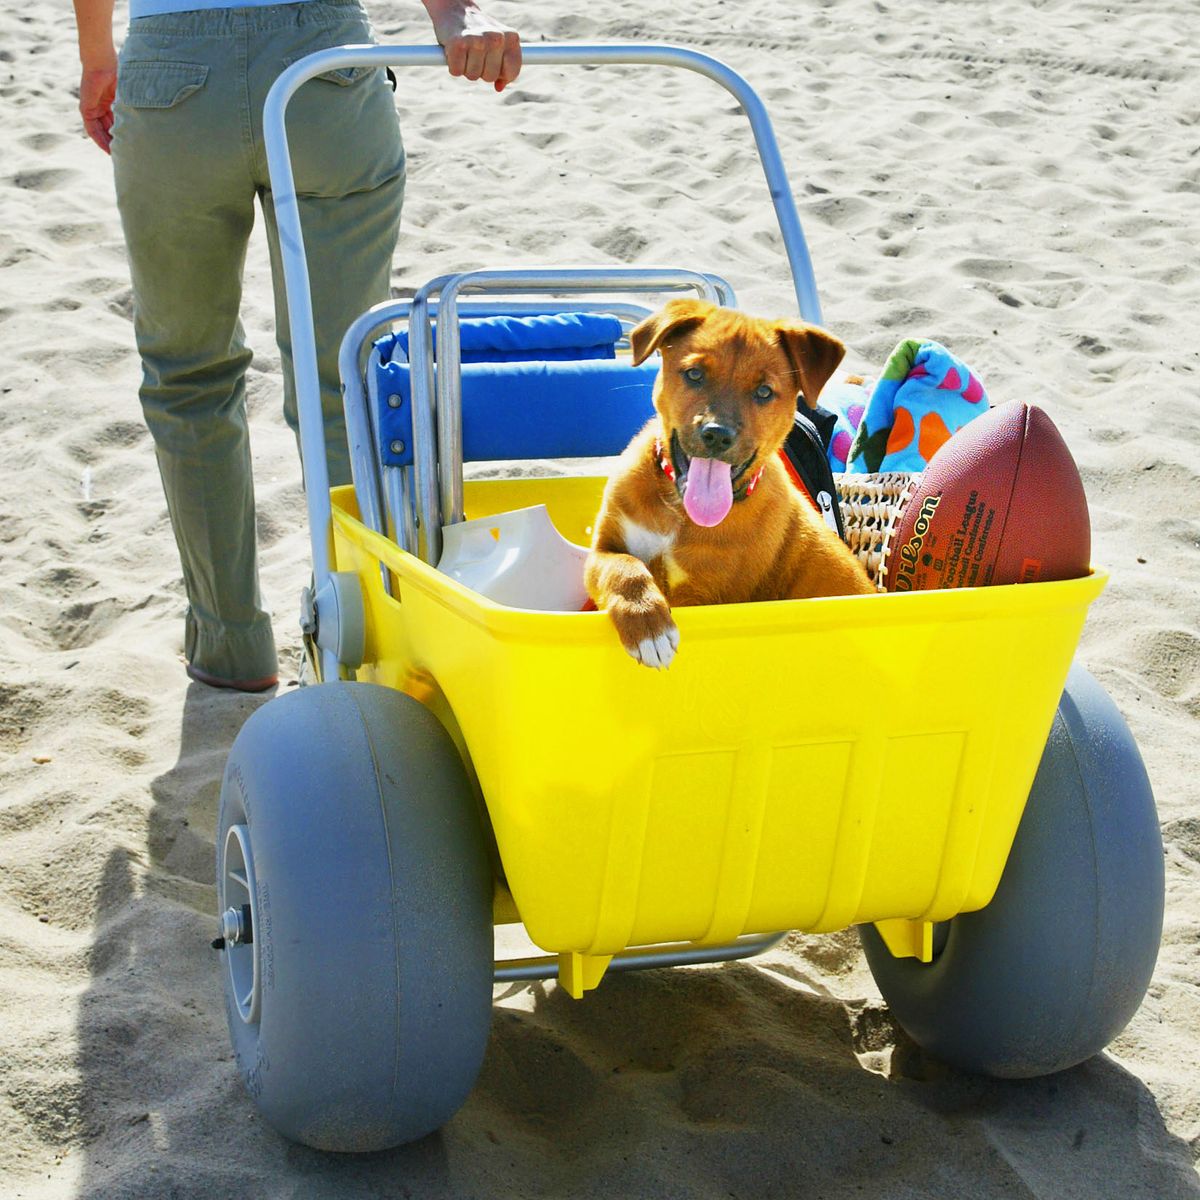 best beach wagon for toddlers